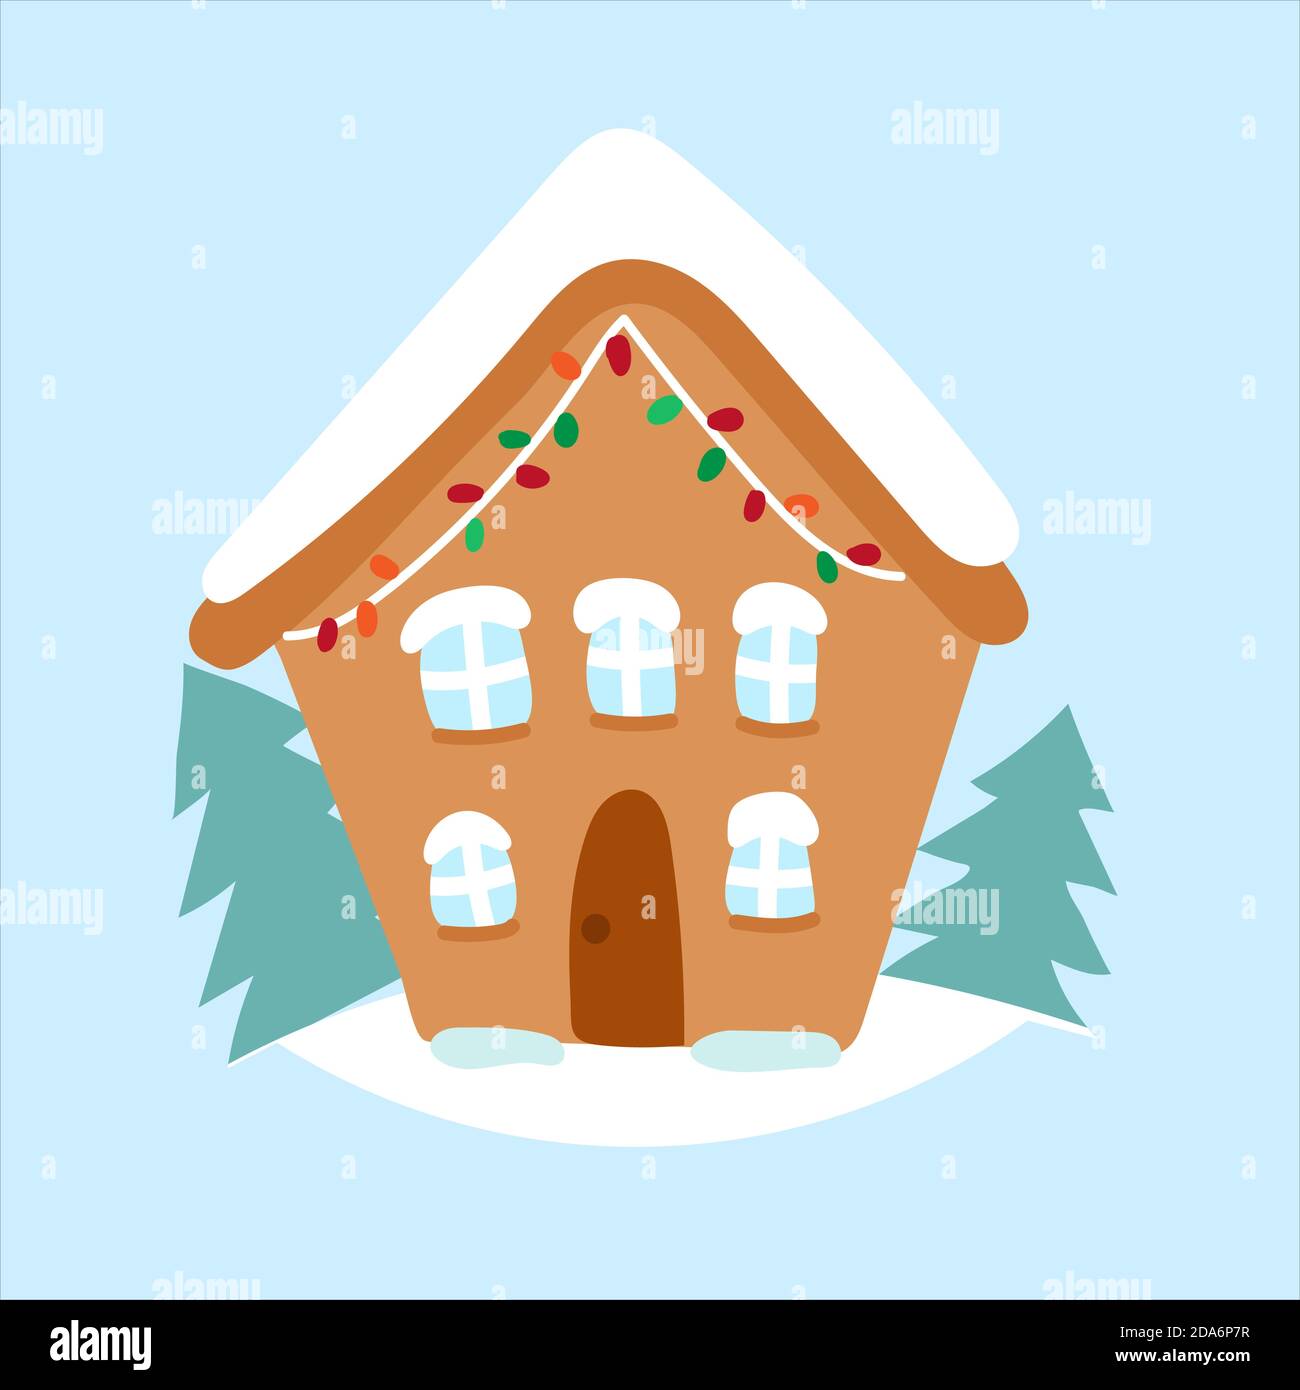 Christmas cartoon brown gingerbread house with snow and colored garland. Vector flat illustration isolated on white background. Stock Vector